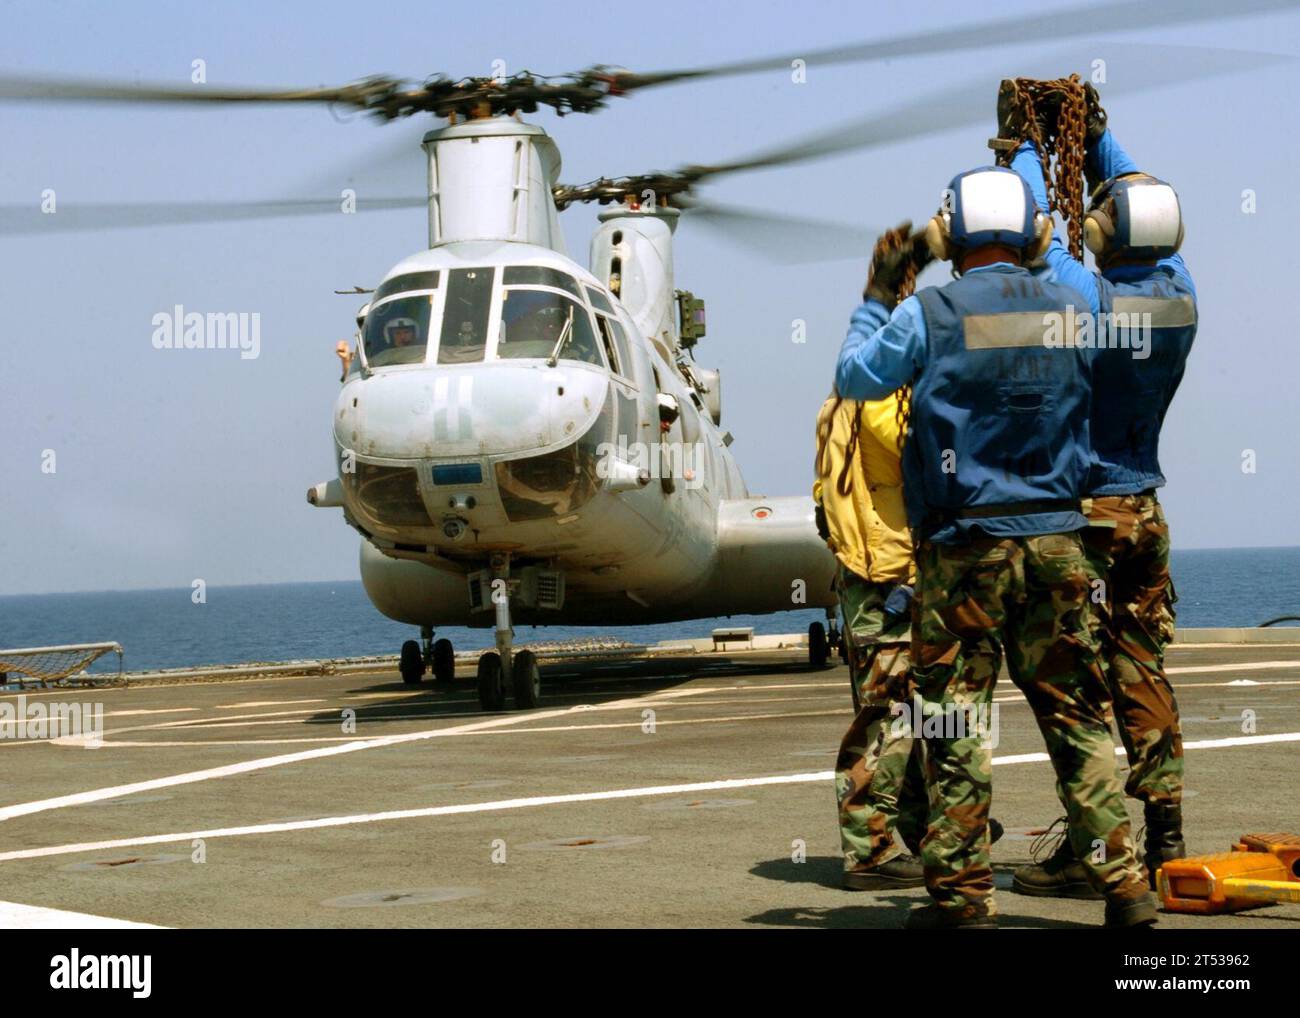 0910243925A-001 JAVA SEA (Oct. 24, 2009) Sailors aboard the amphibious transport dock ship USS Cleveland (LPD 7) signal to the pilot of a CH-46 Sea Knight helicopter assigned to Marine Medium Helicopter Squadron (HMM) 166 that the chock and chains have been removed and the aircraft is ready for flight. Cleveland is part of the Bonhomme Richard Amphibious Ready Group and is transiting the U.S. 7th Fleet area of responsibility. Stock Photo